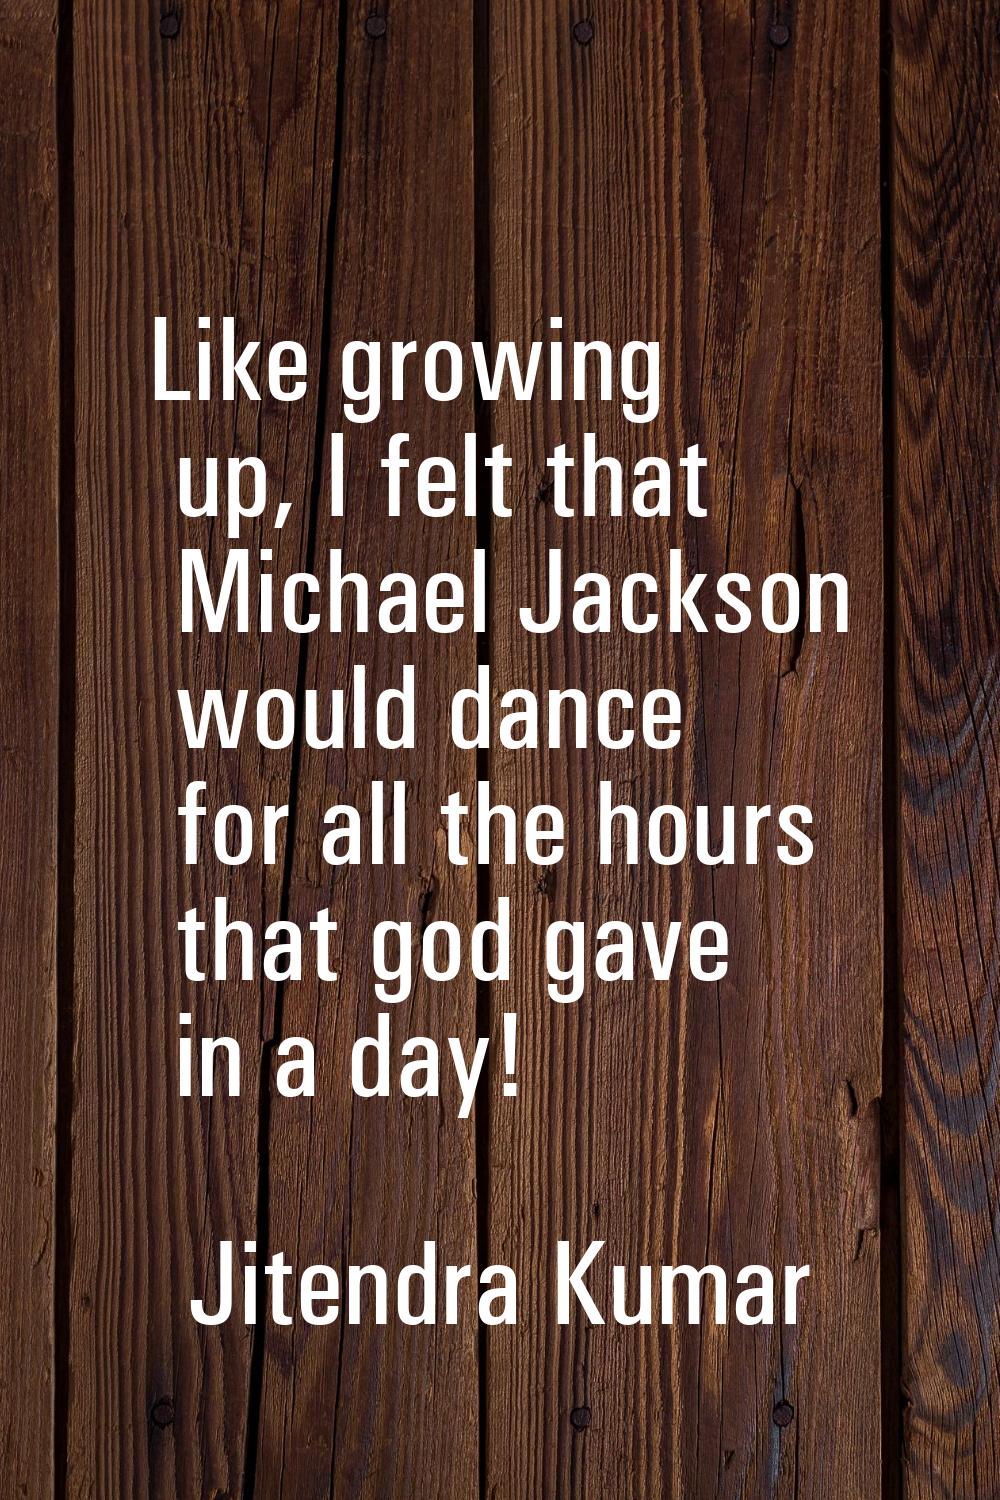 Like growing up, I felt that Michael Jackson would dance for all the hours that god gave in a day!